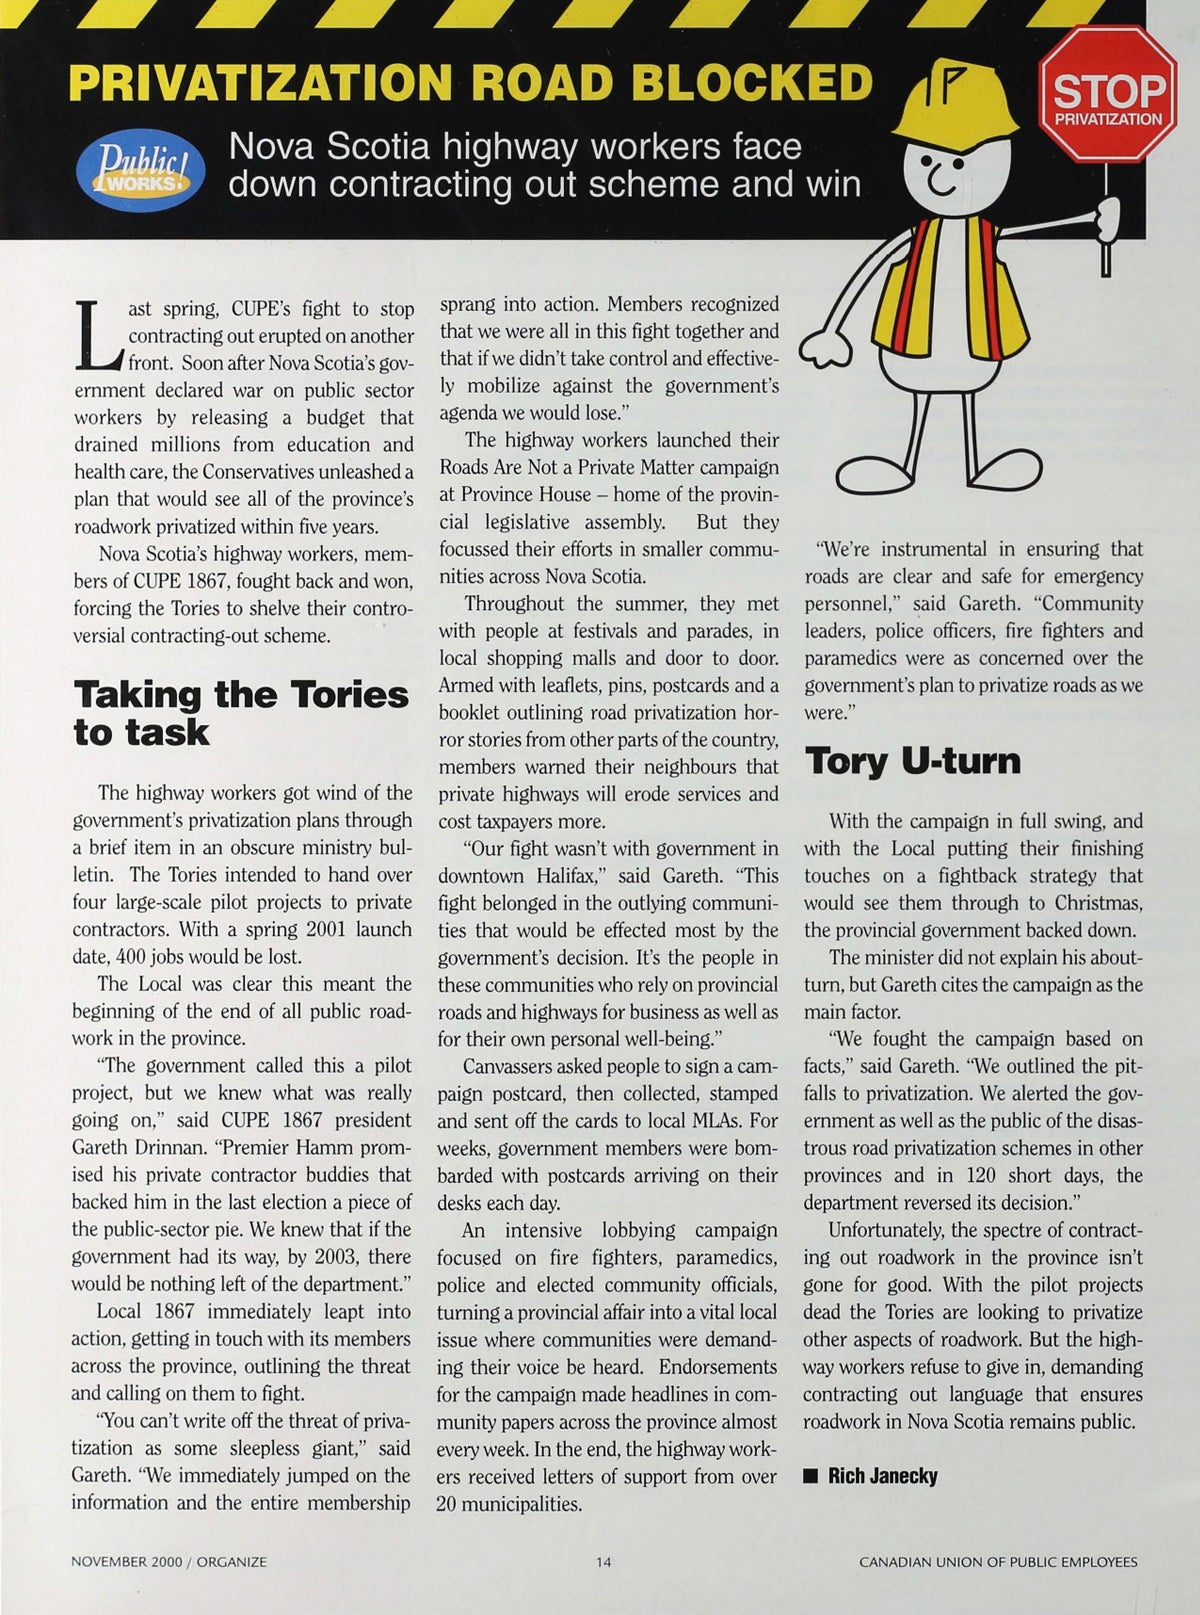 2000 CUPE article